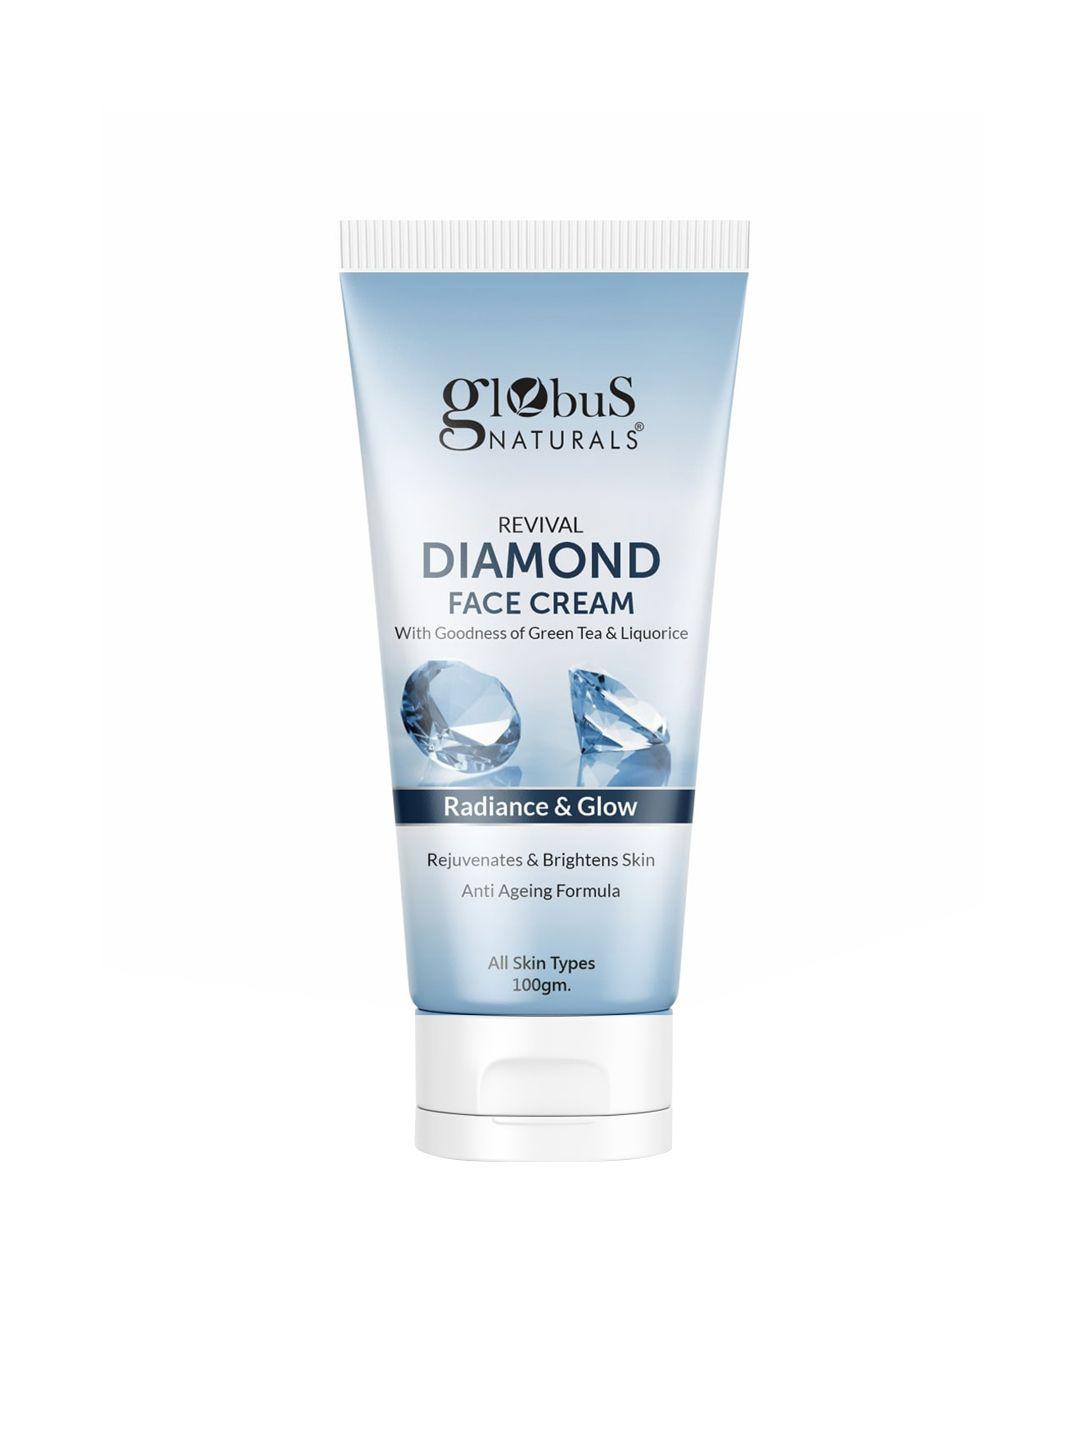 globus naturals revival diamond face cream for radiance & glow - 100 gm